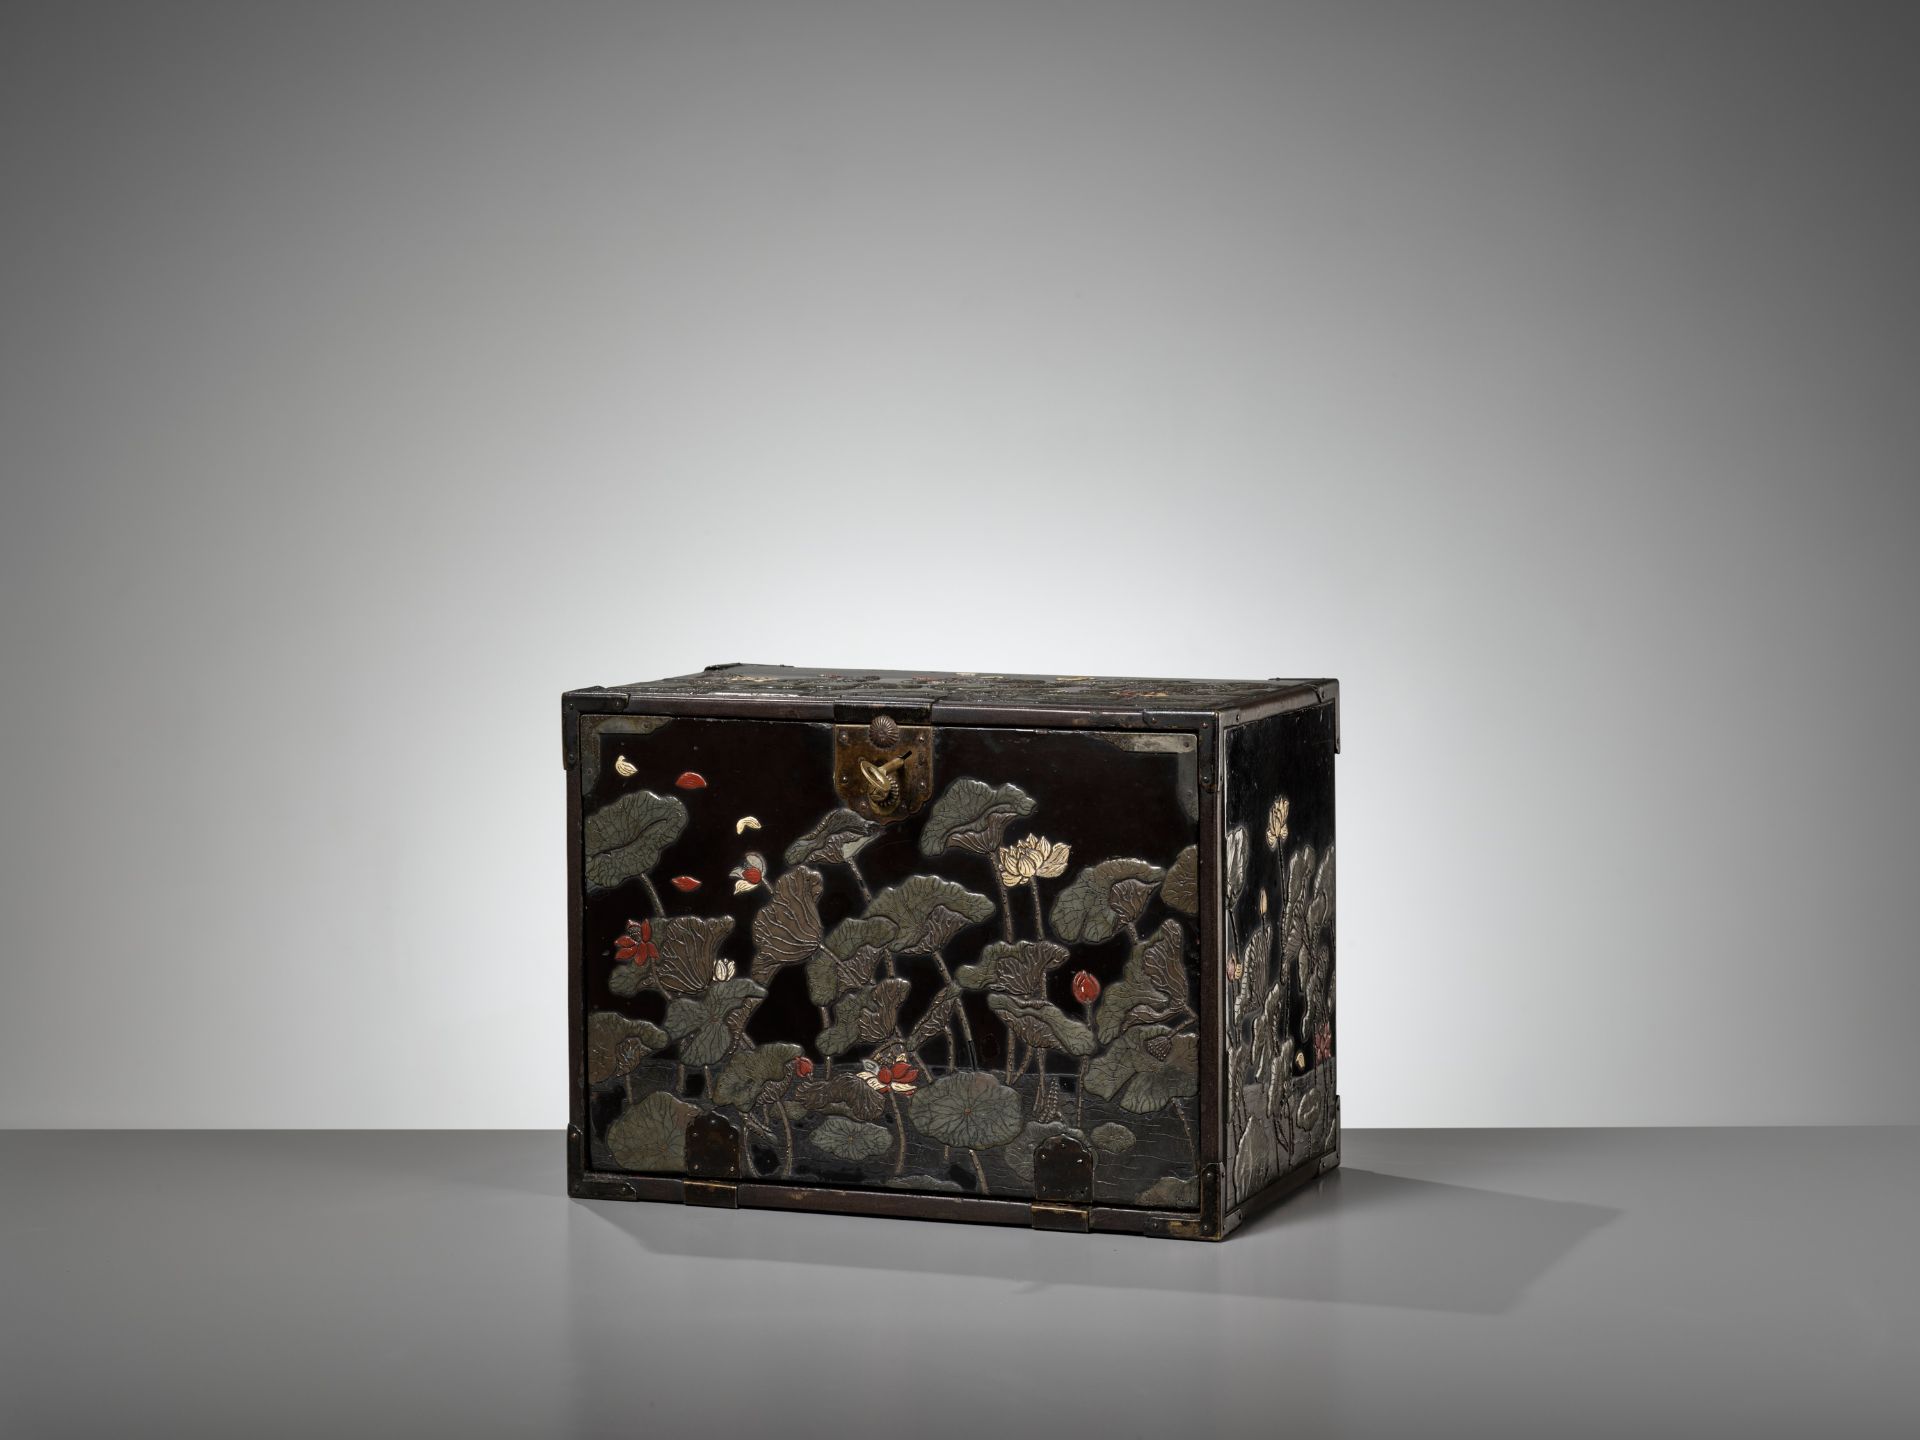 A RITSUO STYLE CERAMIC-INLAID AND LACQUERED WOOD KODANSU (CABINET) WITH A LOTUS POND AND EGRETS - Image 7 of 14